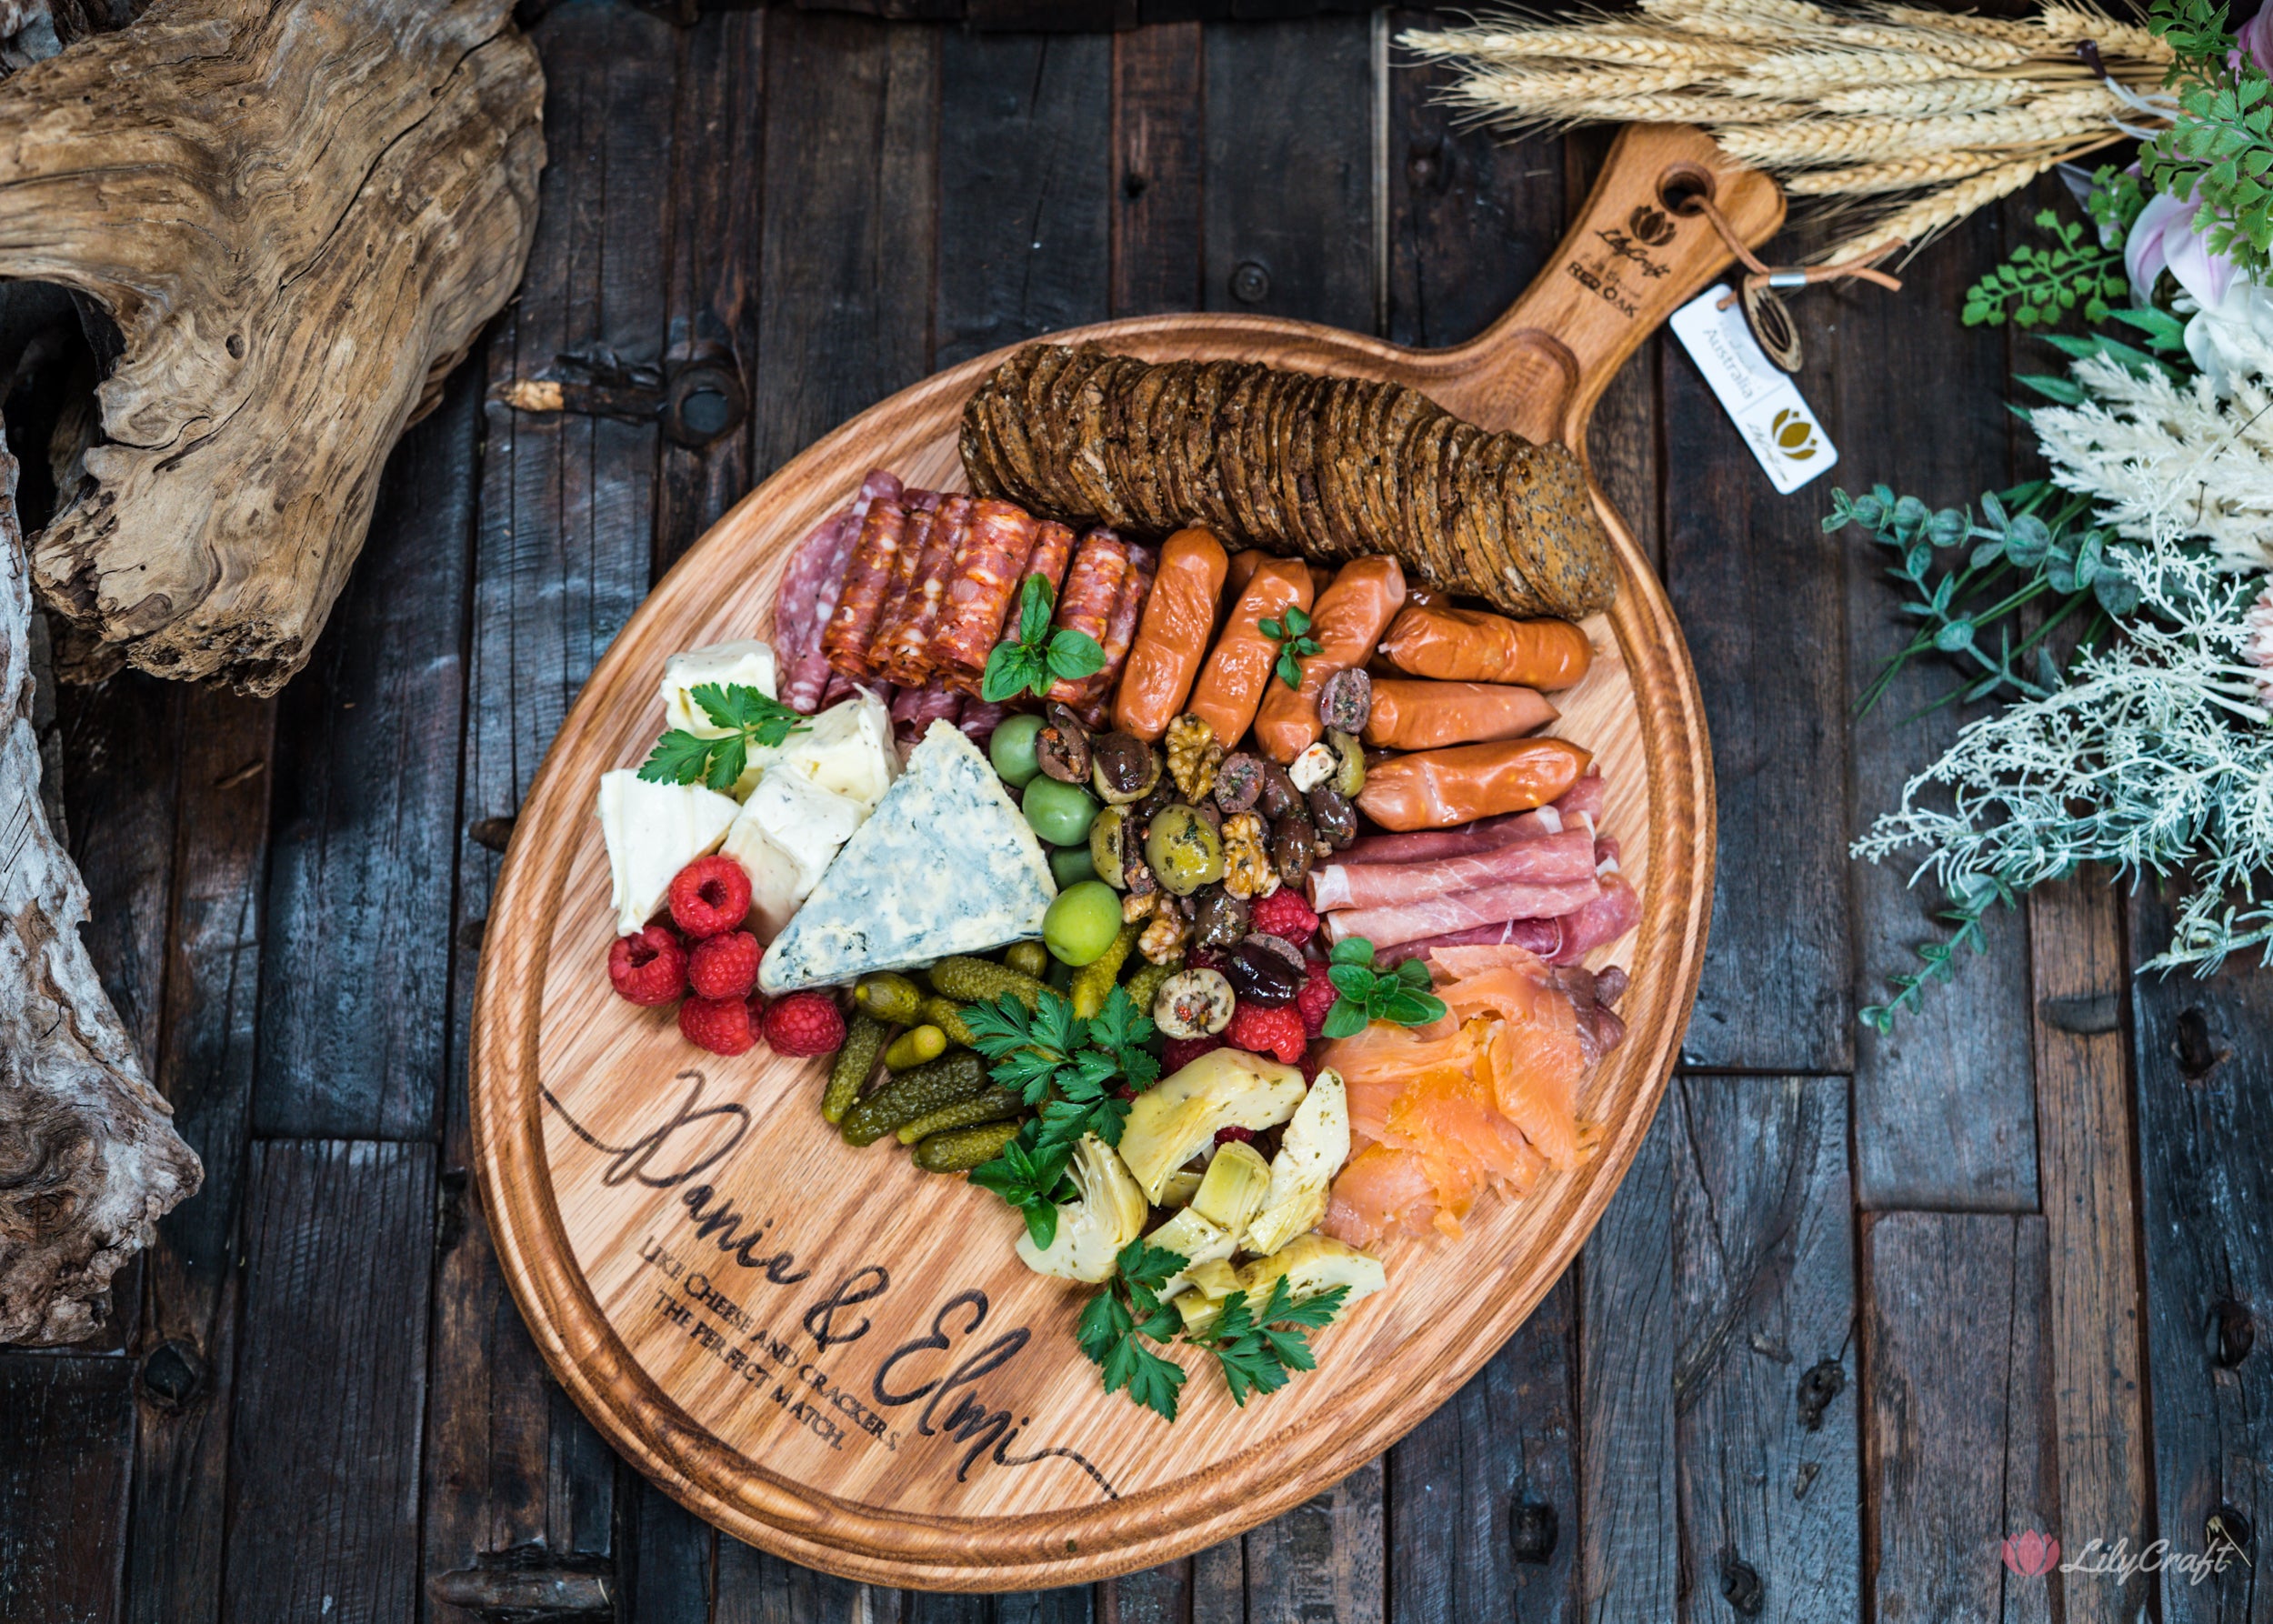 Elegant wooden charcuterie display, meticulously handcrafted for special occasions. This versatile board is designed to meet your hosting needs with style.